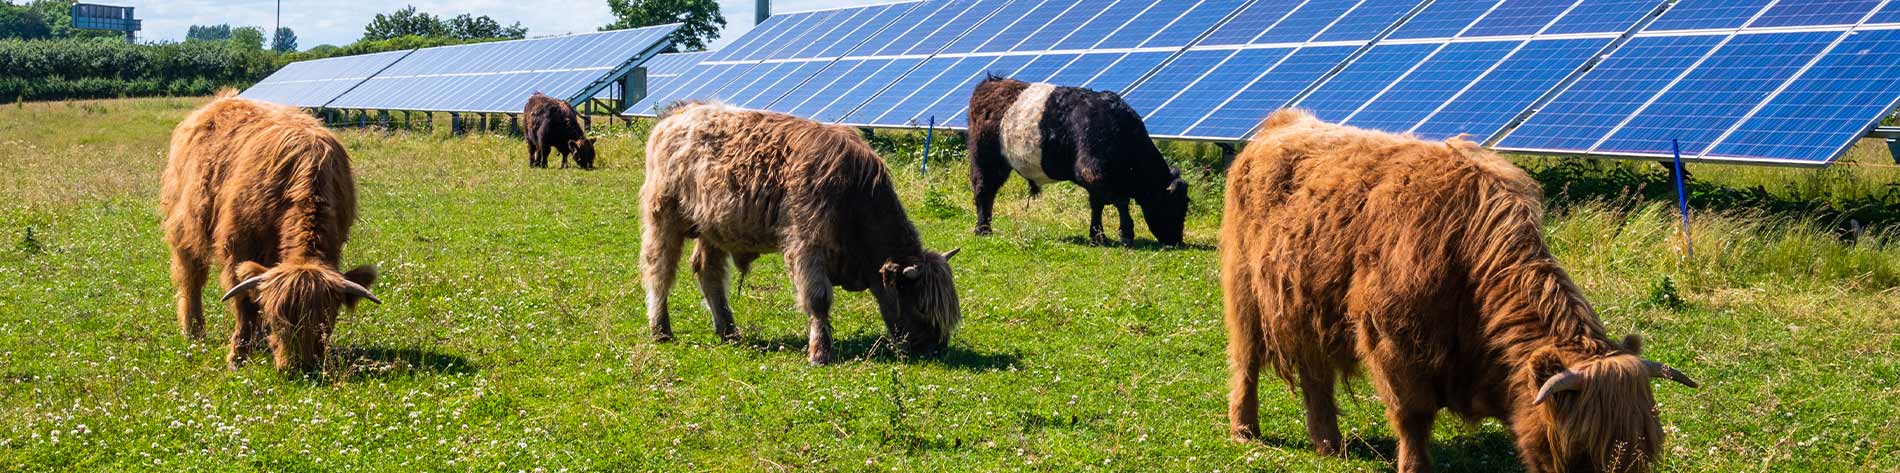 Cows grazing in front of solar panels.